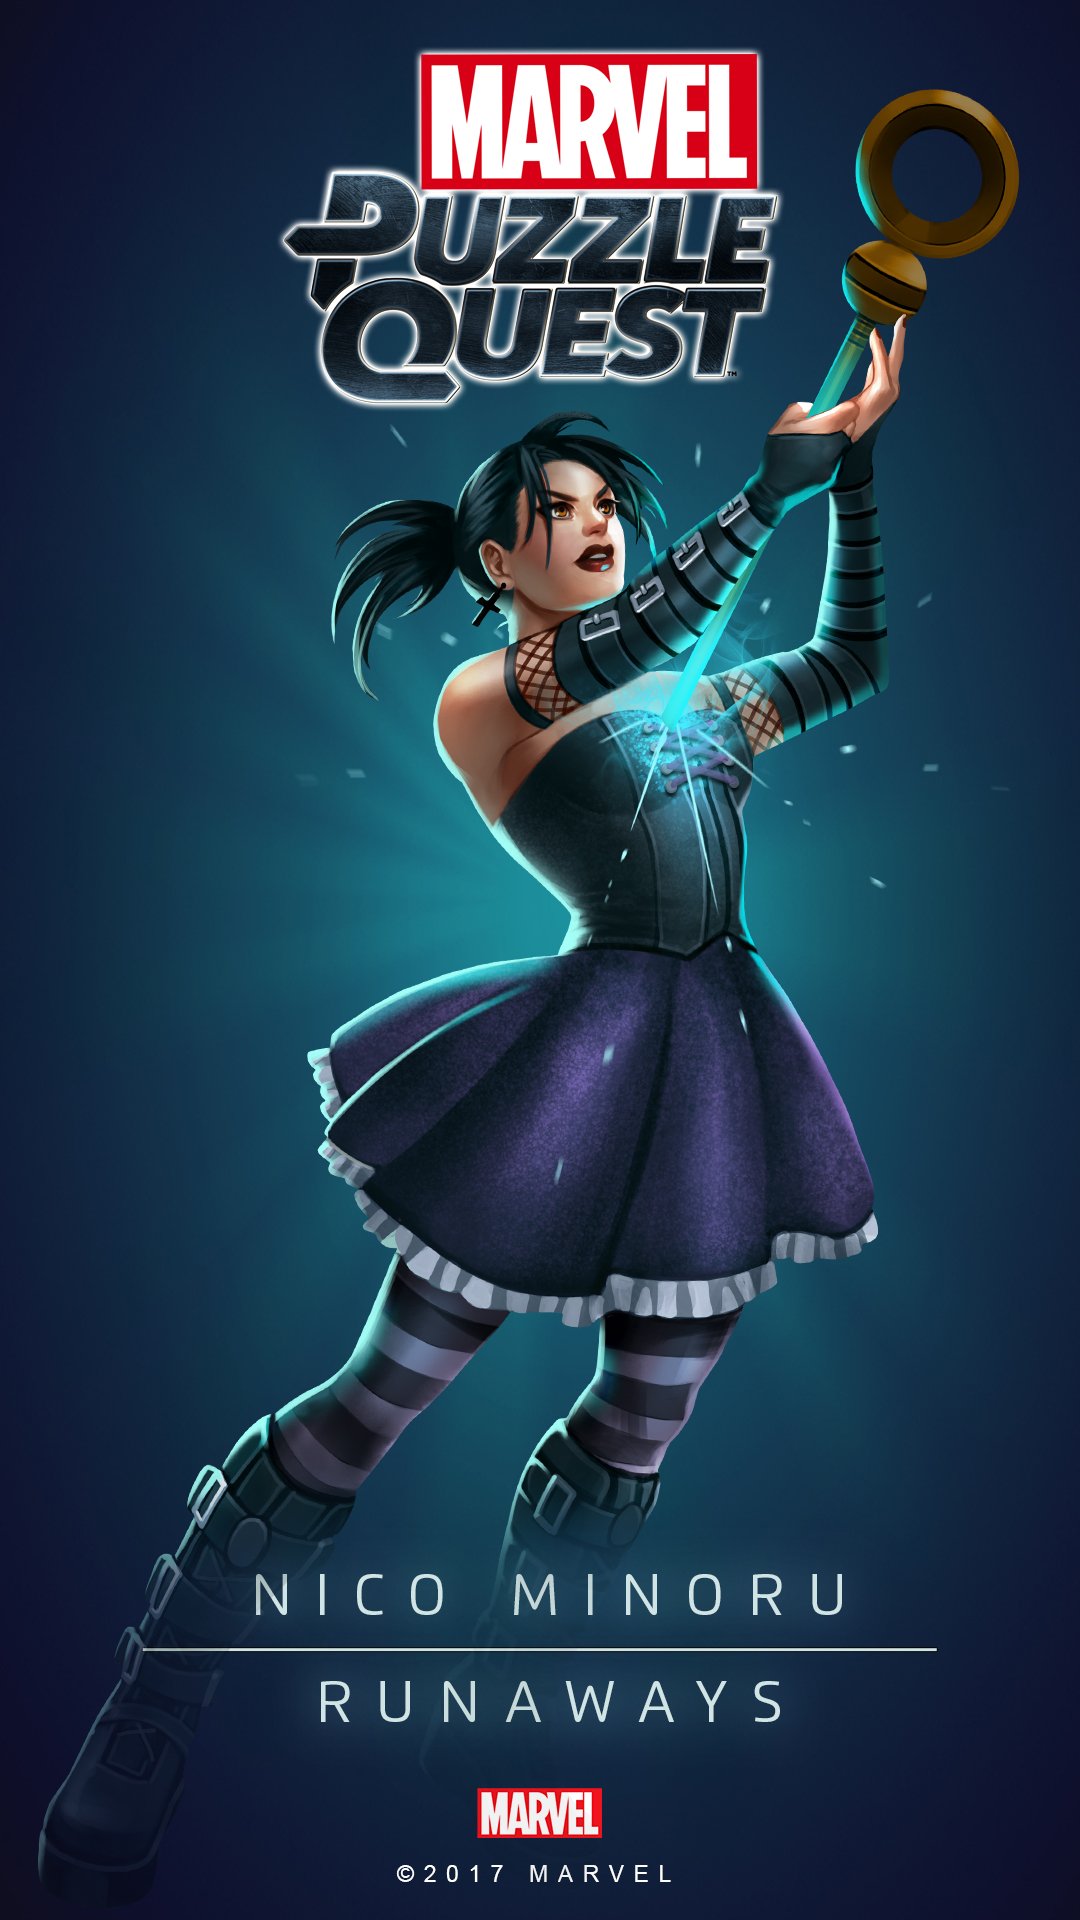 Marvel Puzzle Quest some magic to your mobile display with these Nico Minoru wallpaper! #MarvelPuzzleQuest